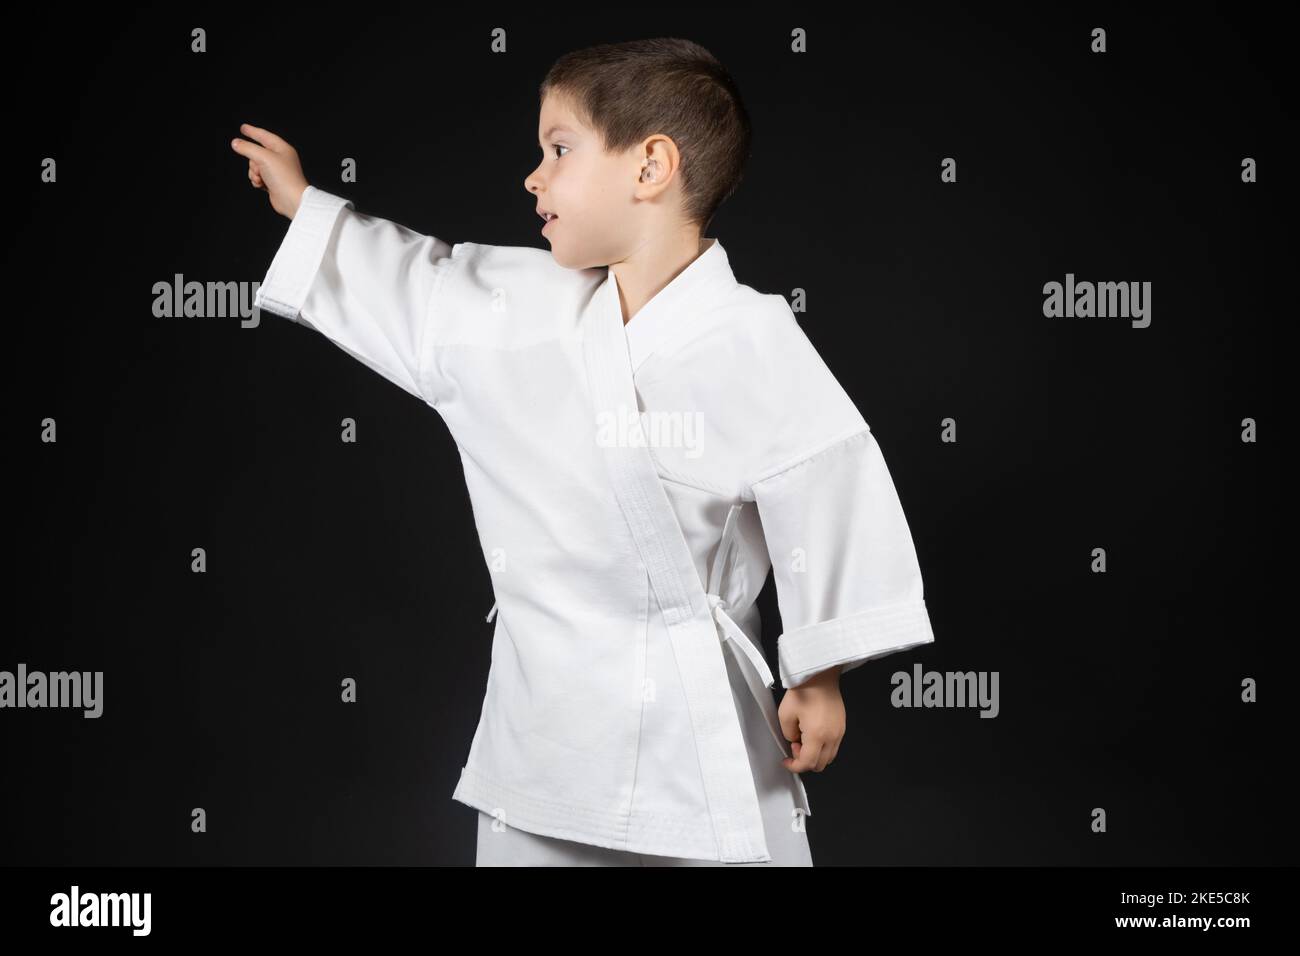 A little boy in a kimono points his hand to the side on a black background. Stock Photo